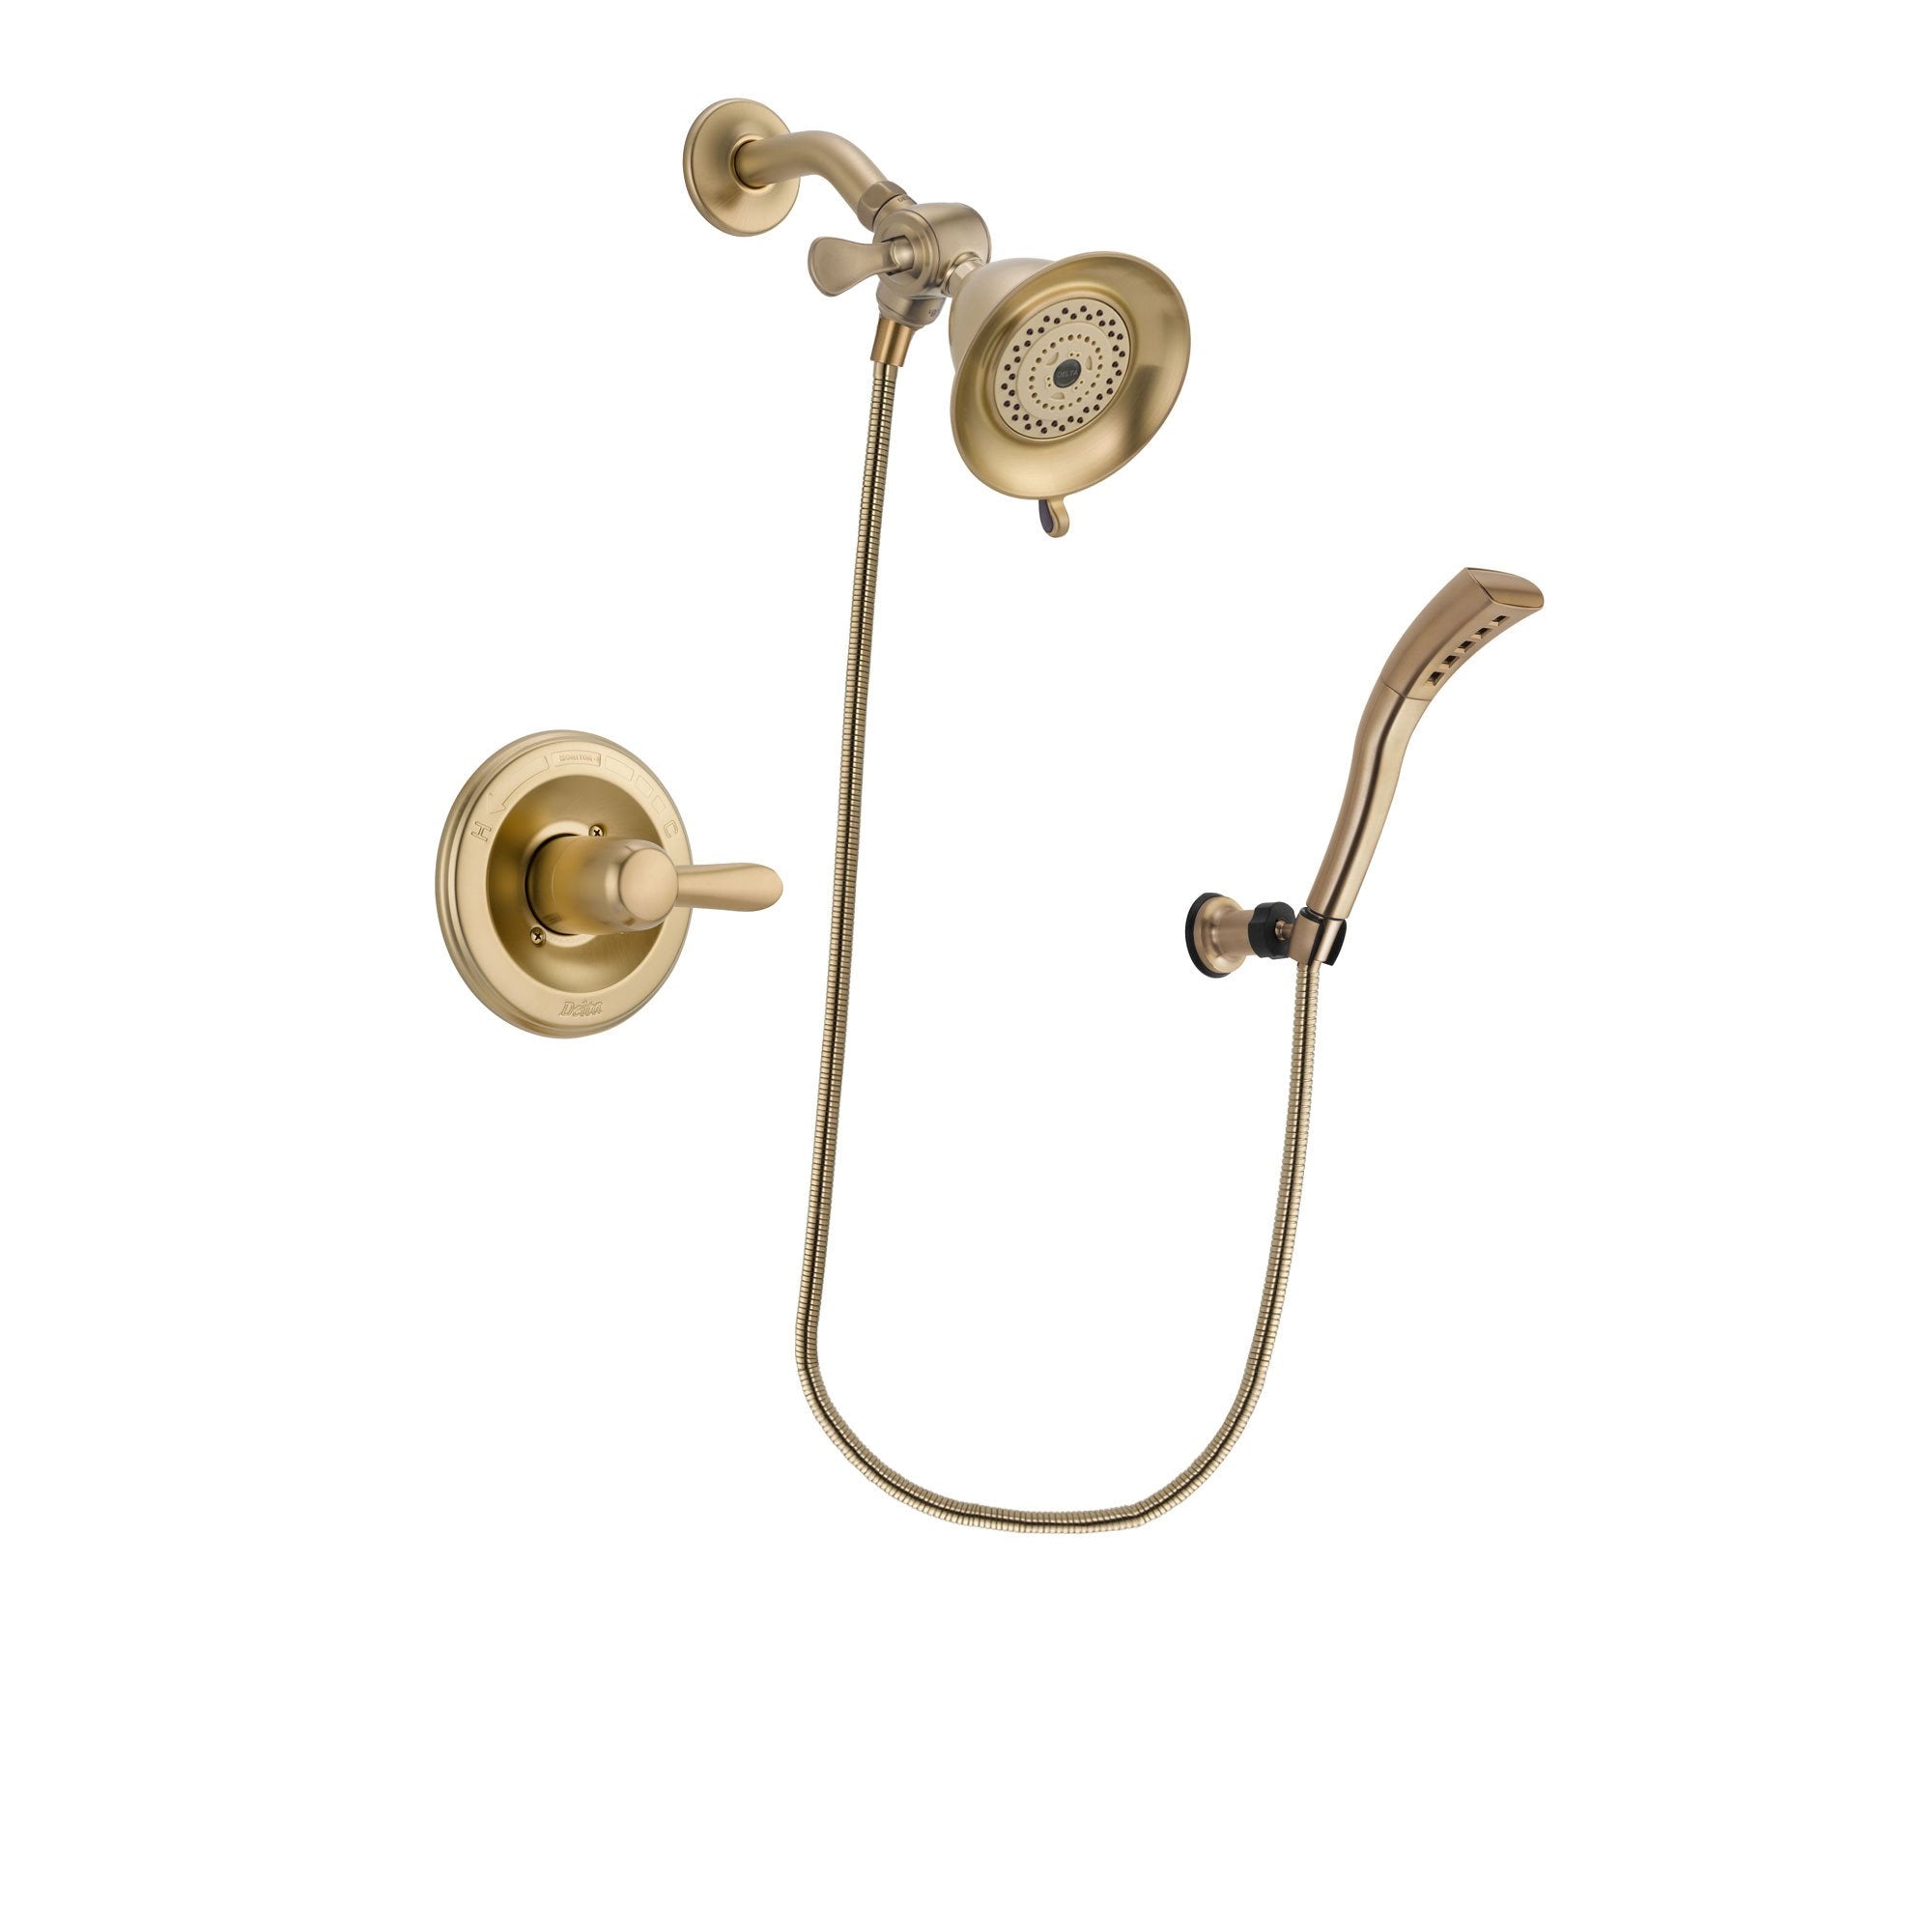 Delta Lahara Champagne Bronze Finish Shower Faucet System Package with Water-Efficient Shower Head and Modern Wall Mount Personal Handheld Shower Spray Includes Rough-in Valve DSP3638V